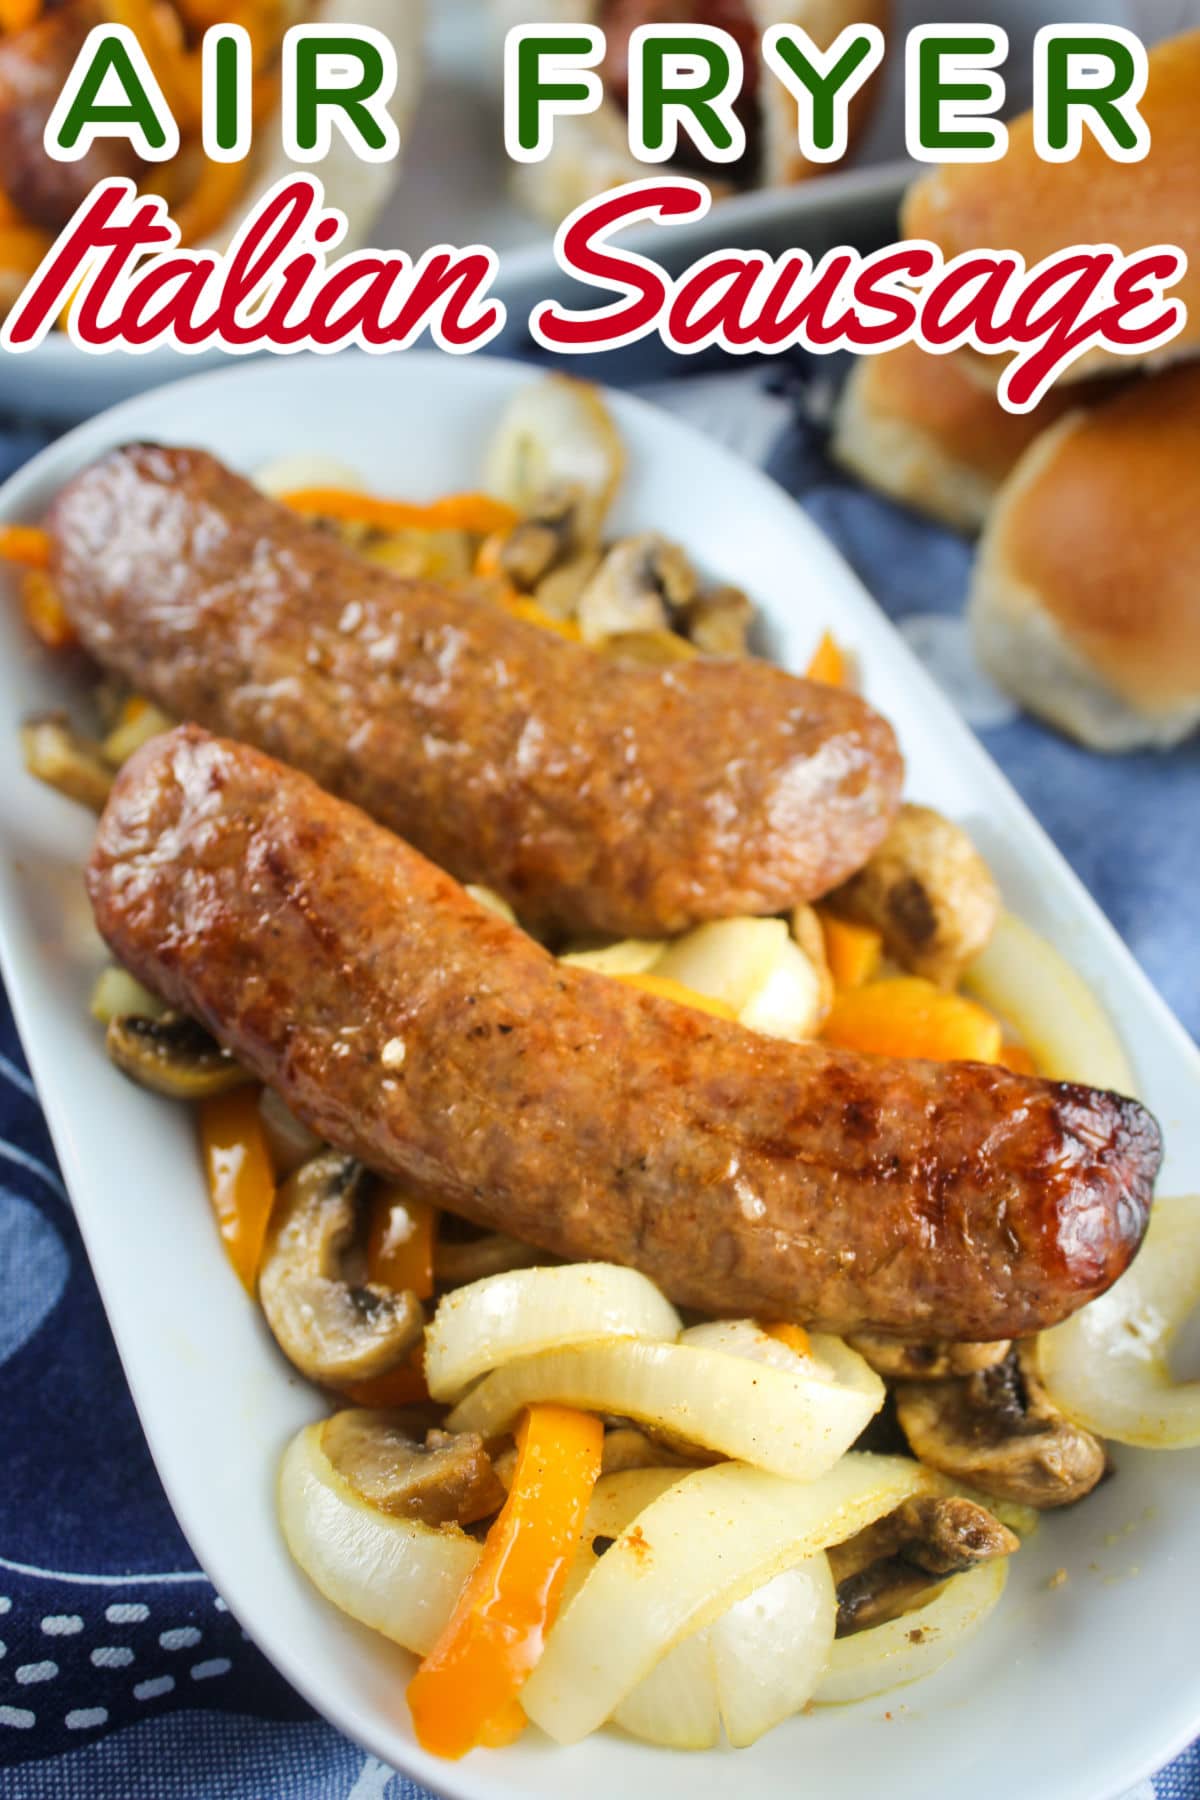 Air Fryer Italian Sausage and Peppers is a super quick weeknight meal that's ready in just 10 minutes! I like to add onions and peppers when I'm making this too. They all go together and taste great when I make Sausage Sandwiches!  via @foodhussy